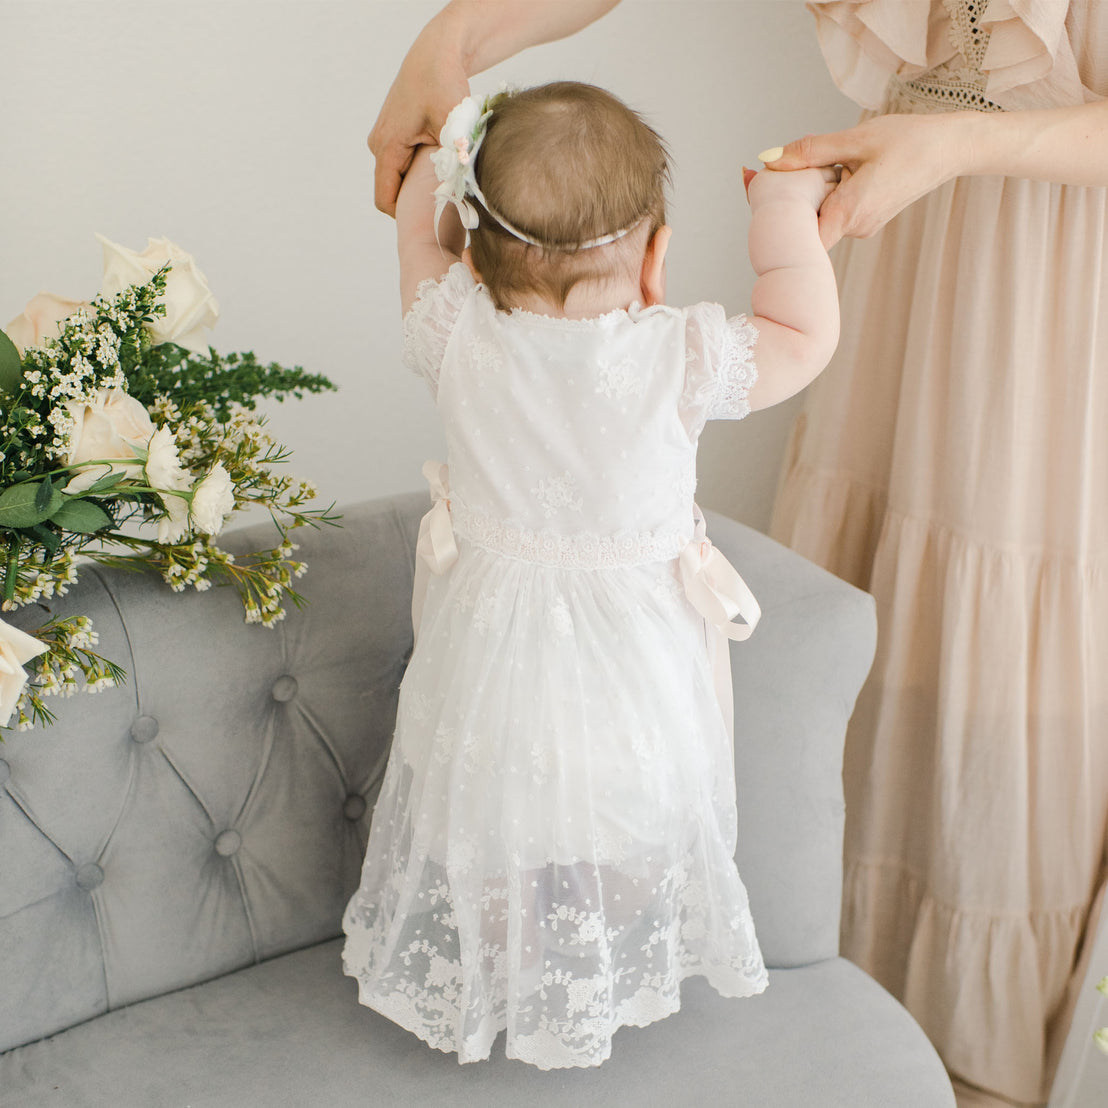 A baby in a Melissa Romper Dress is held up by her mother, who is adjusting a floral headband on her head, in a softly decorated room with flowers nearby.